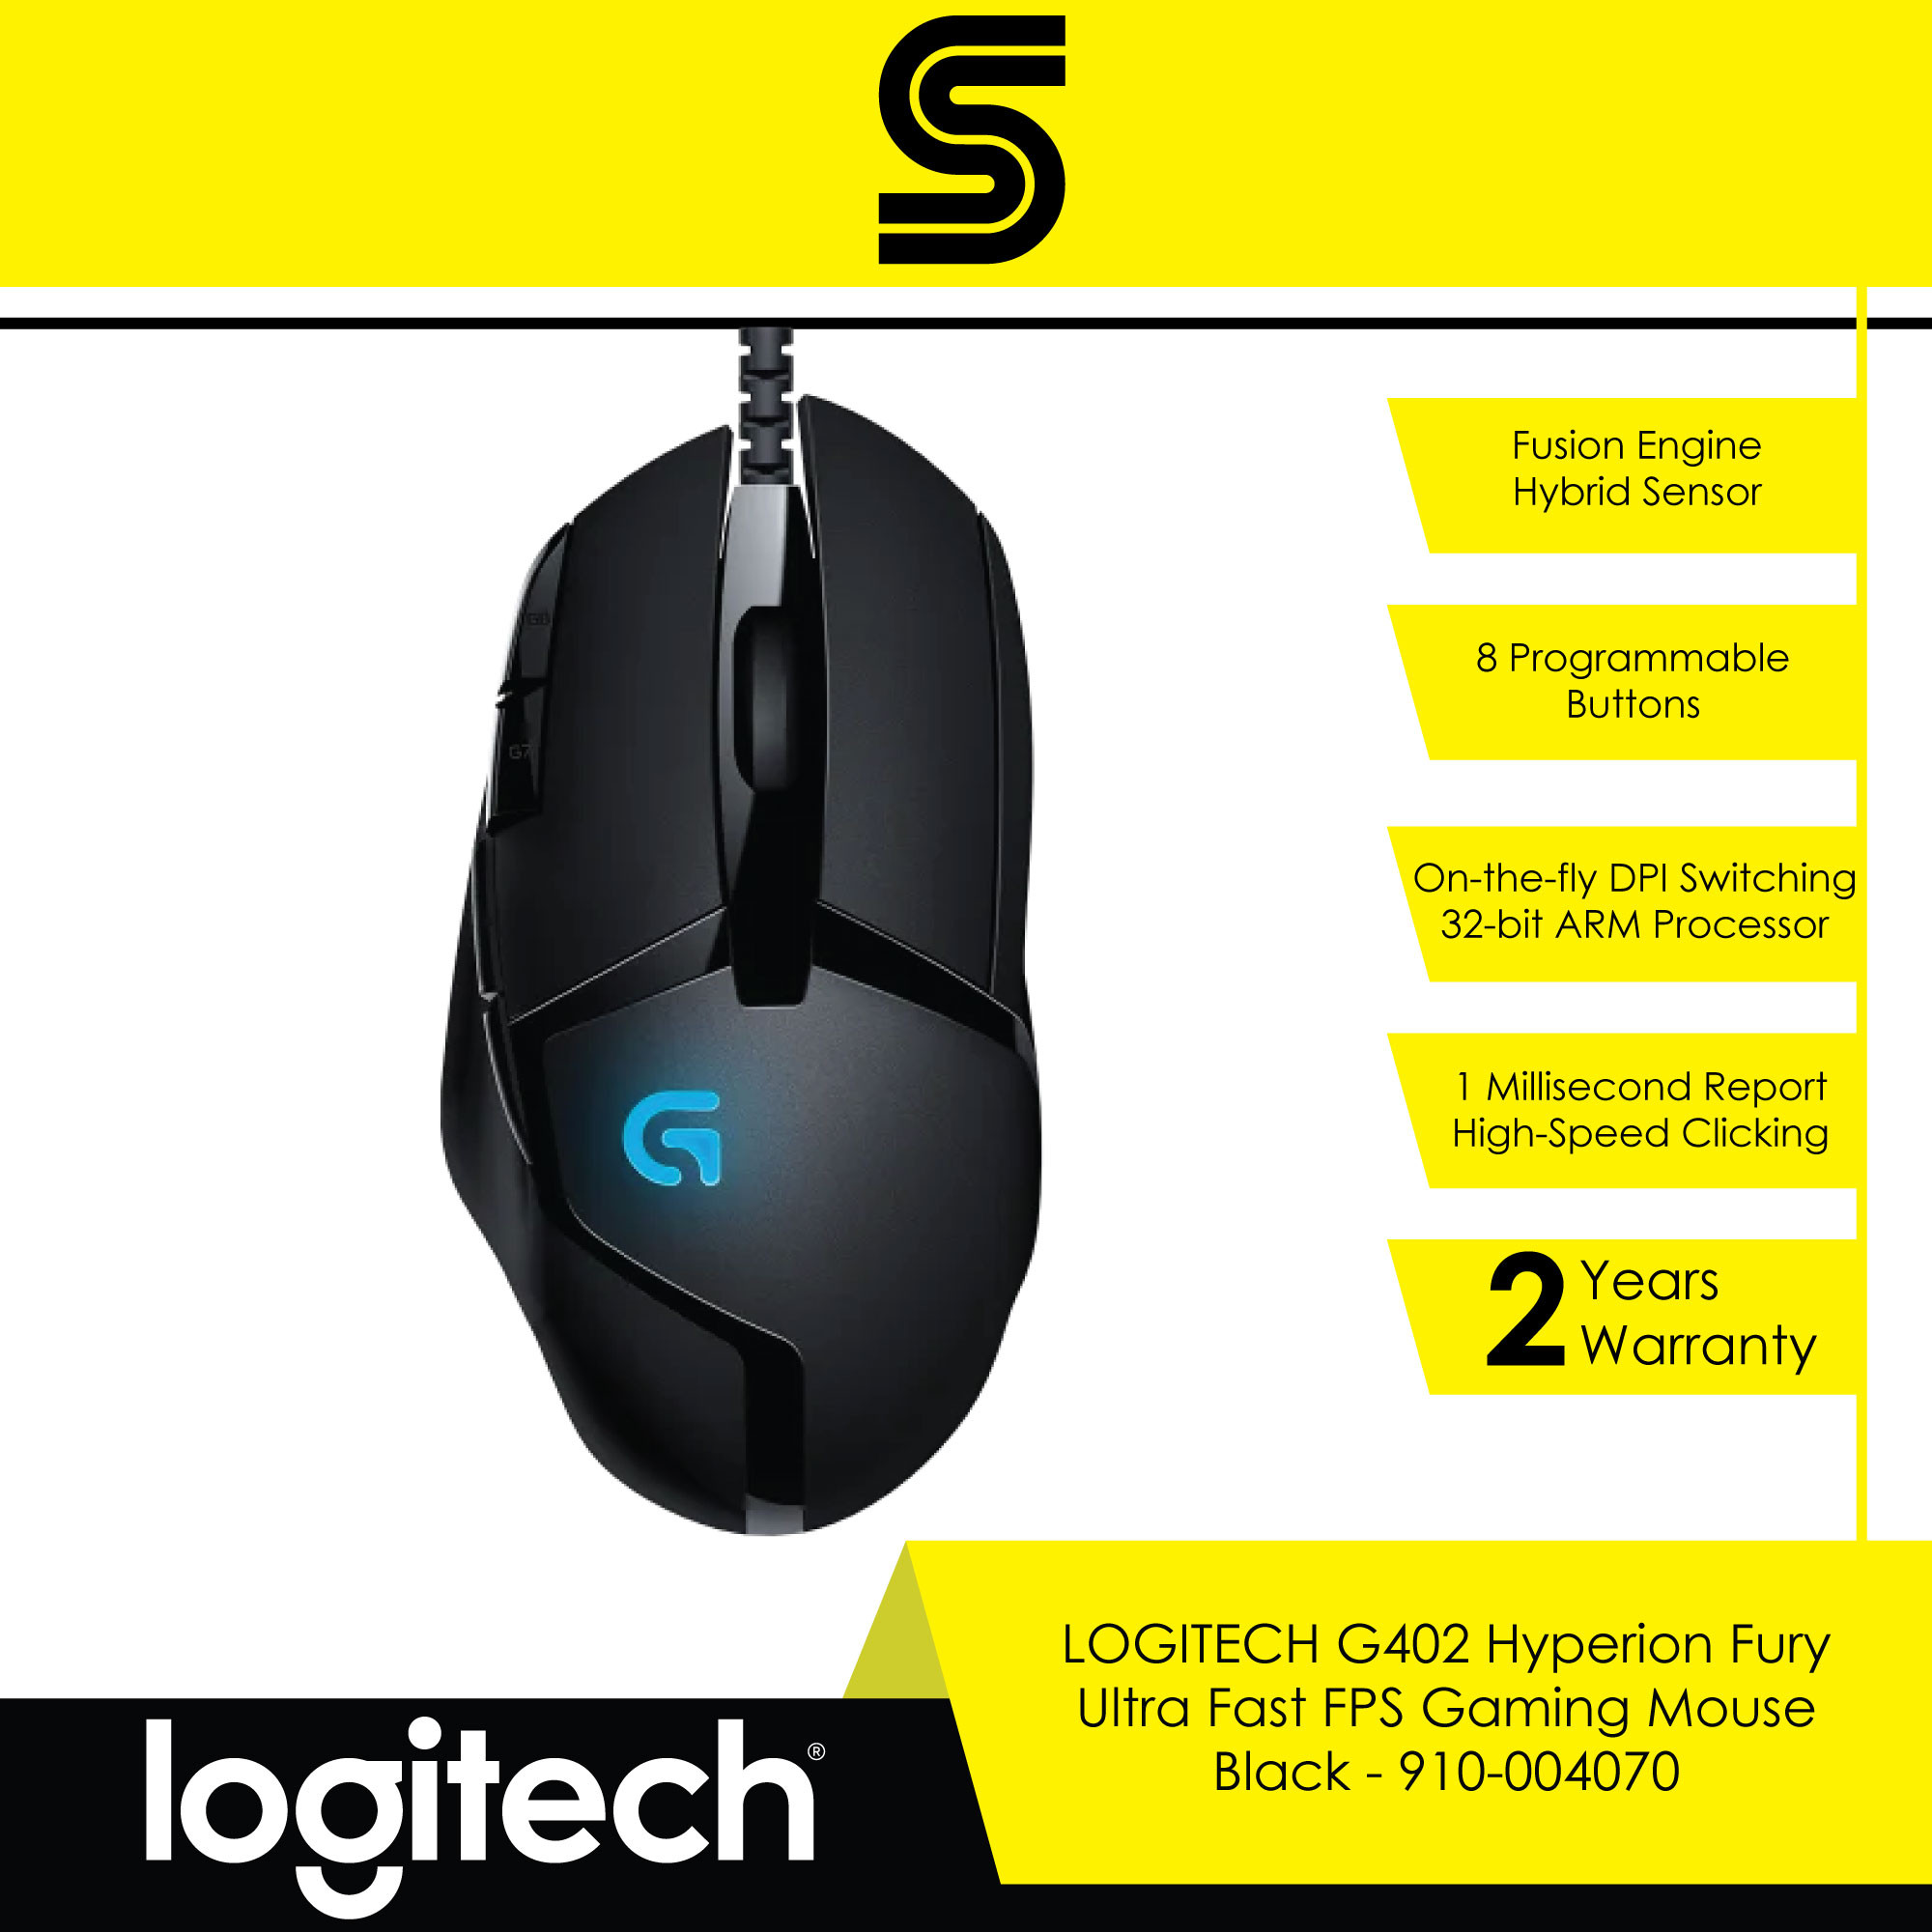 910-004070, Logitech G402 Hyperion Fury FPS Gaming Mouse, USB Type